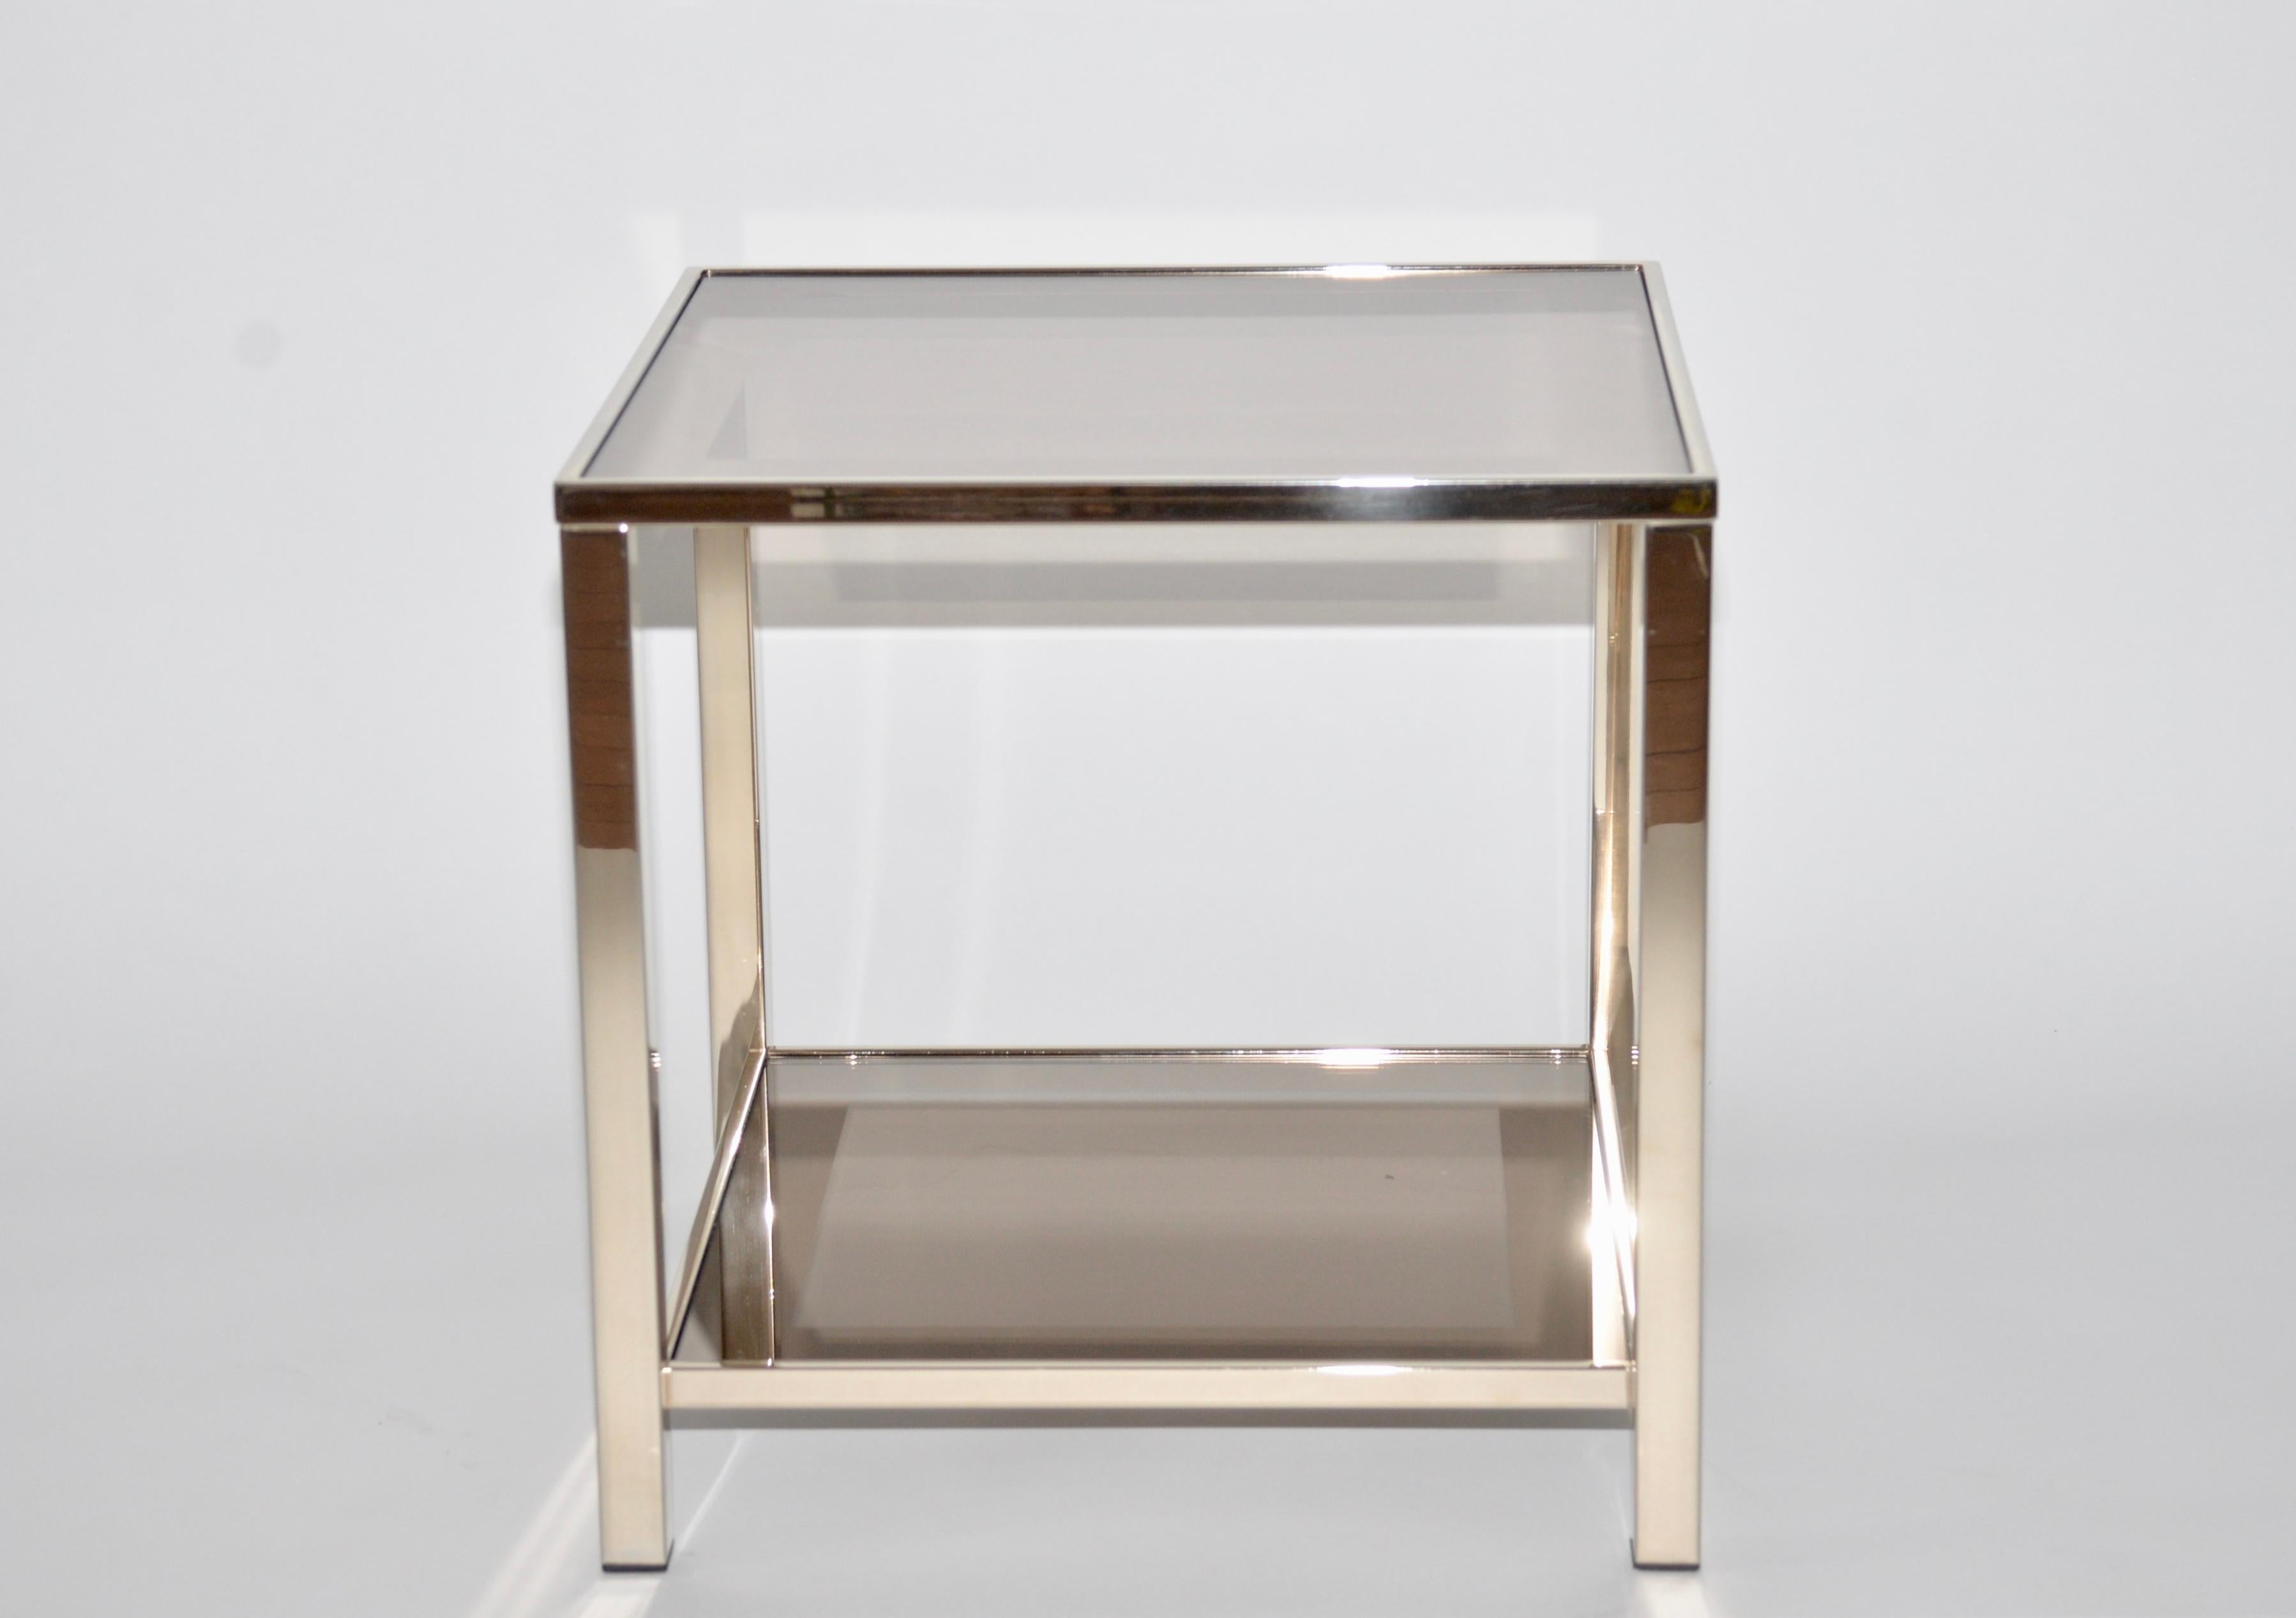 Belgo Chrome side table with an elegant tone to the gold plating with a sepia brown mirrored glass top with a 7cm border with another mirrored glass shelf below. An iconic Classic design of the 1980s when Belgo Chrome were known for their designs in